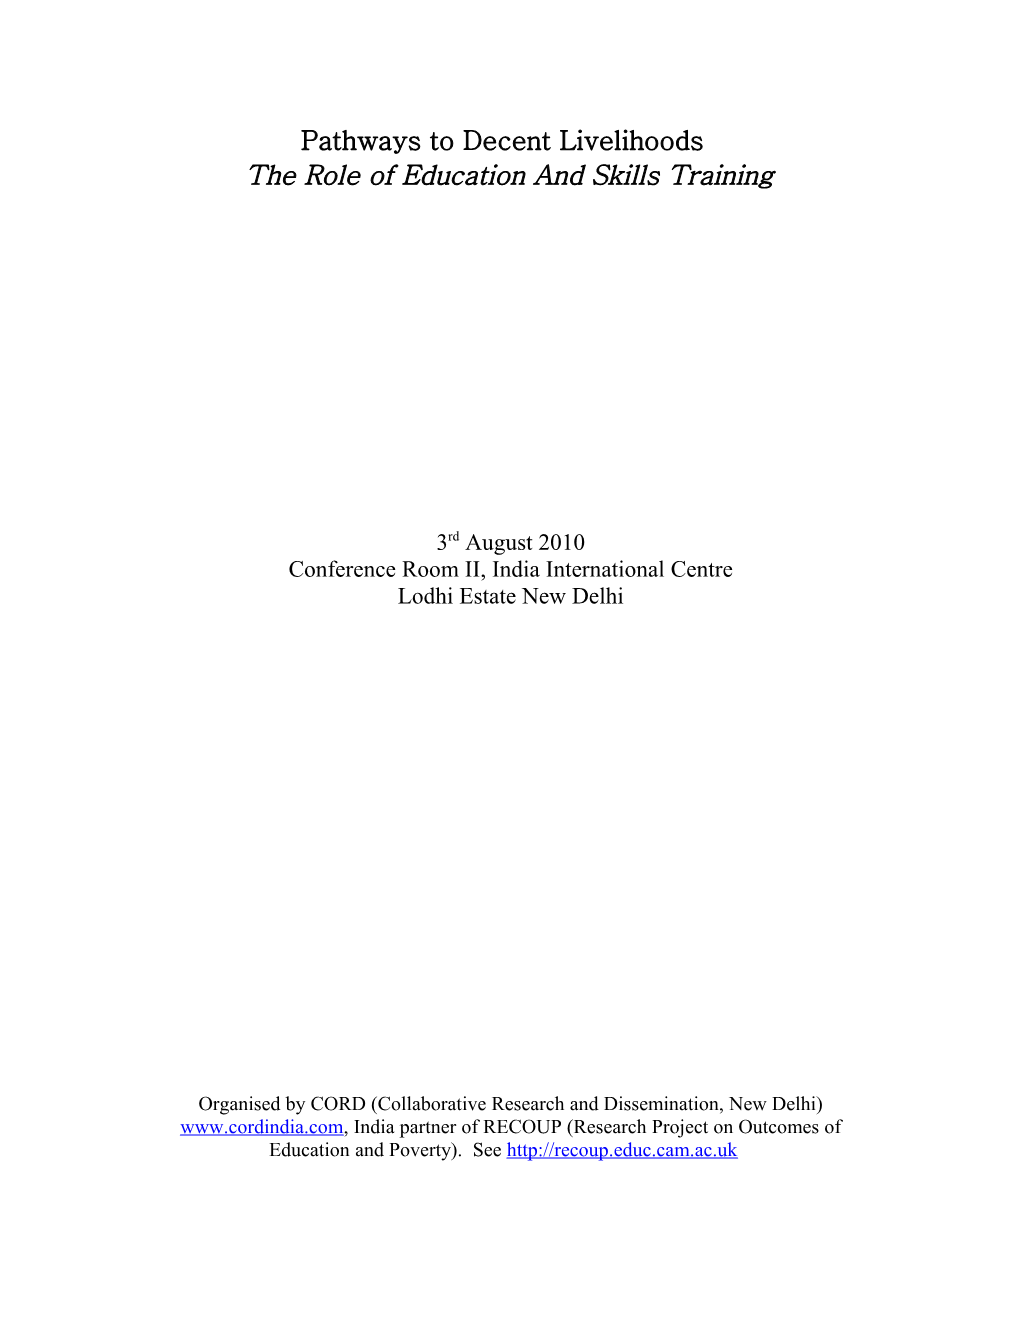 The Role of Education and Skills Training